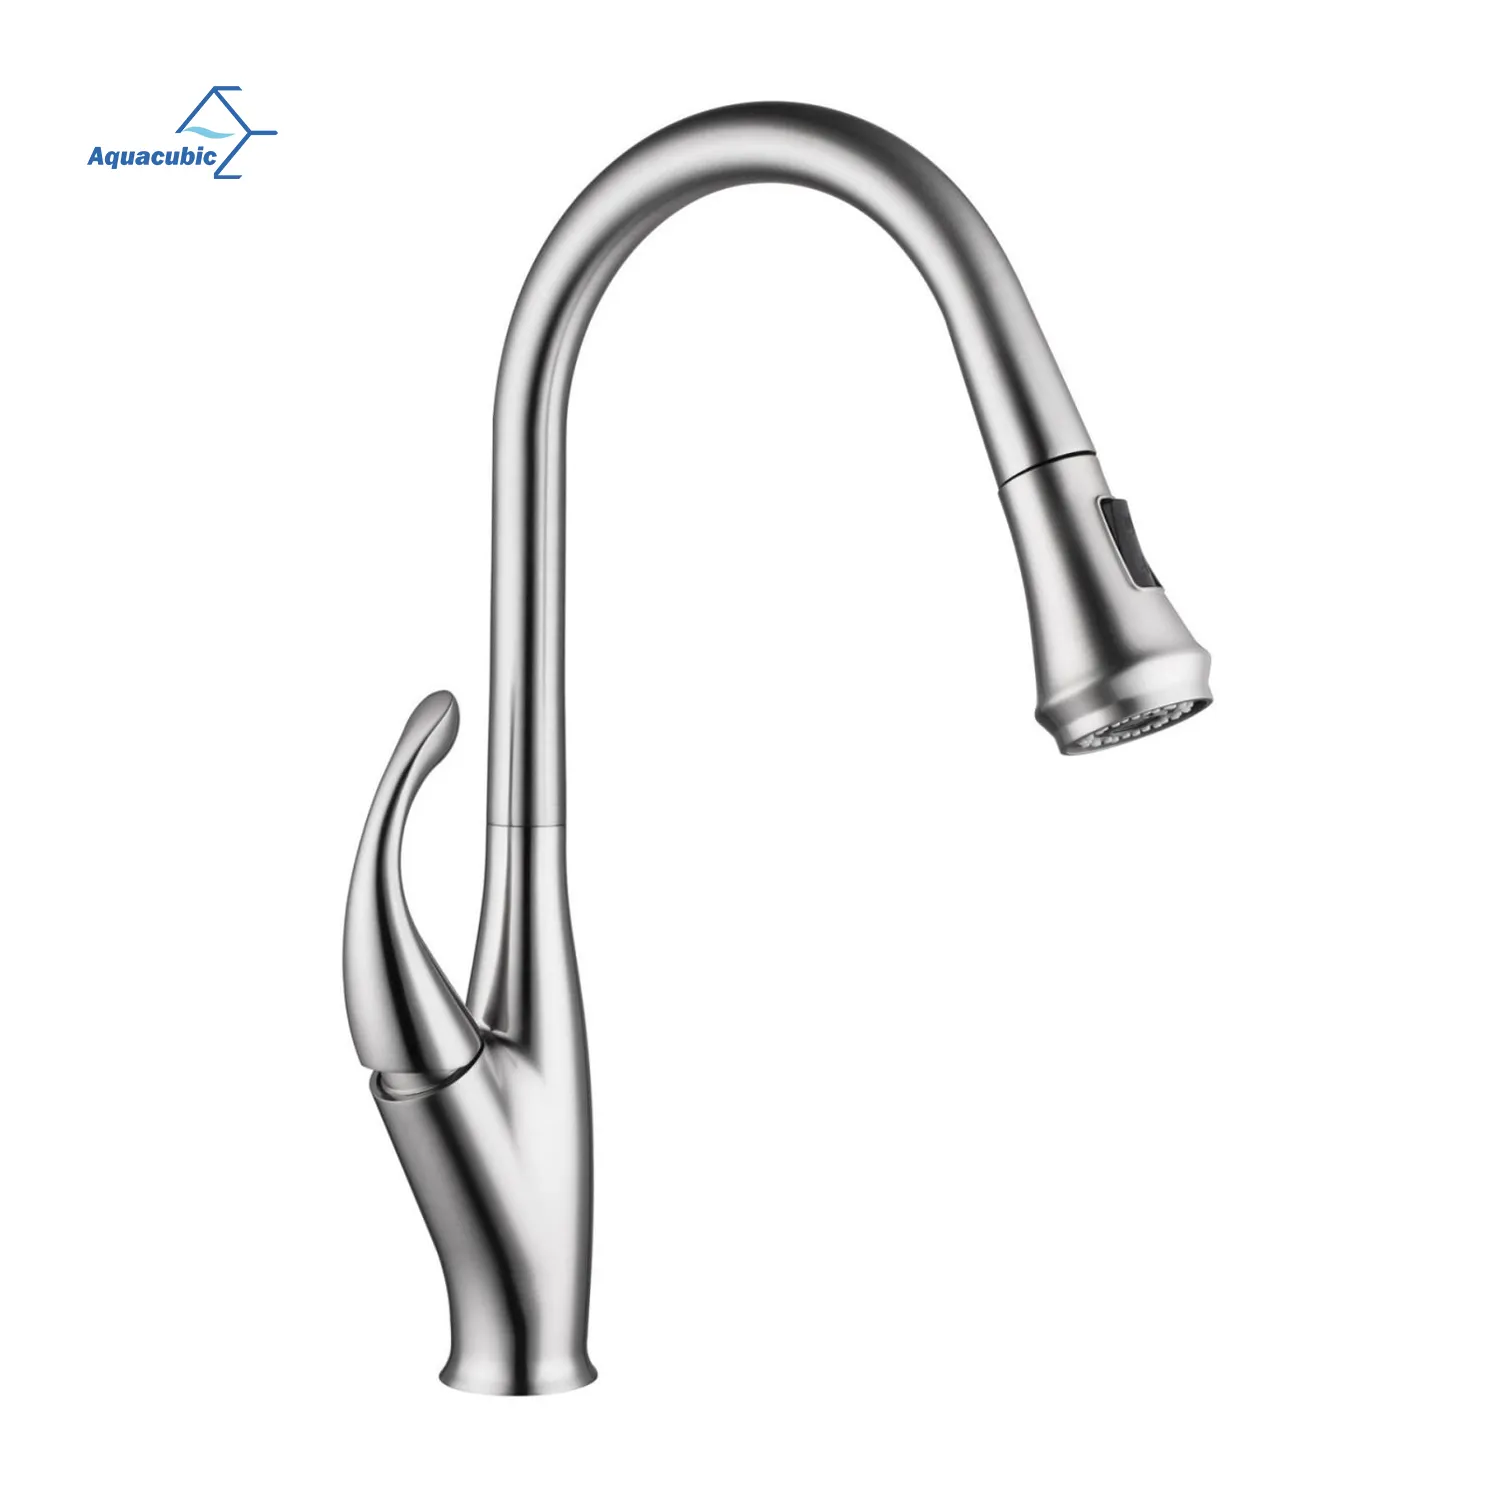 New High Arc cUPC lead free pull out Kitchen Faucets with Pull Down Sprayer